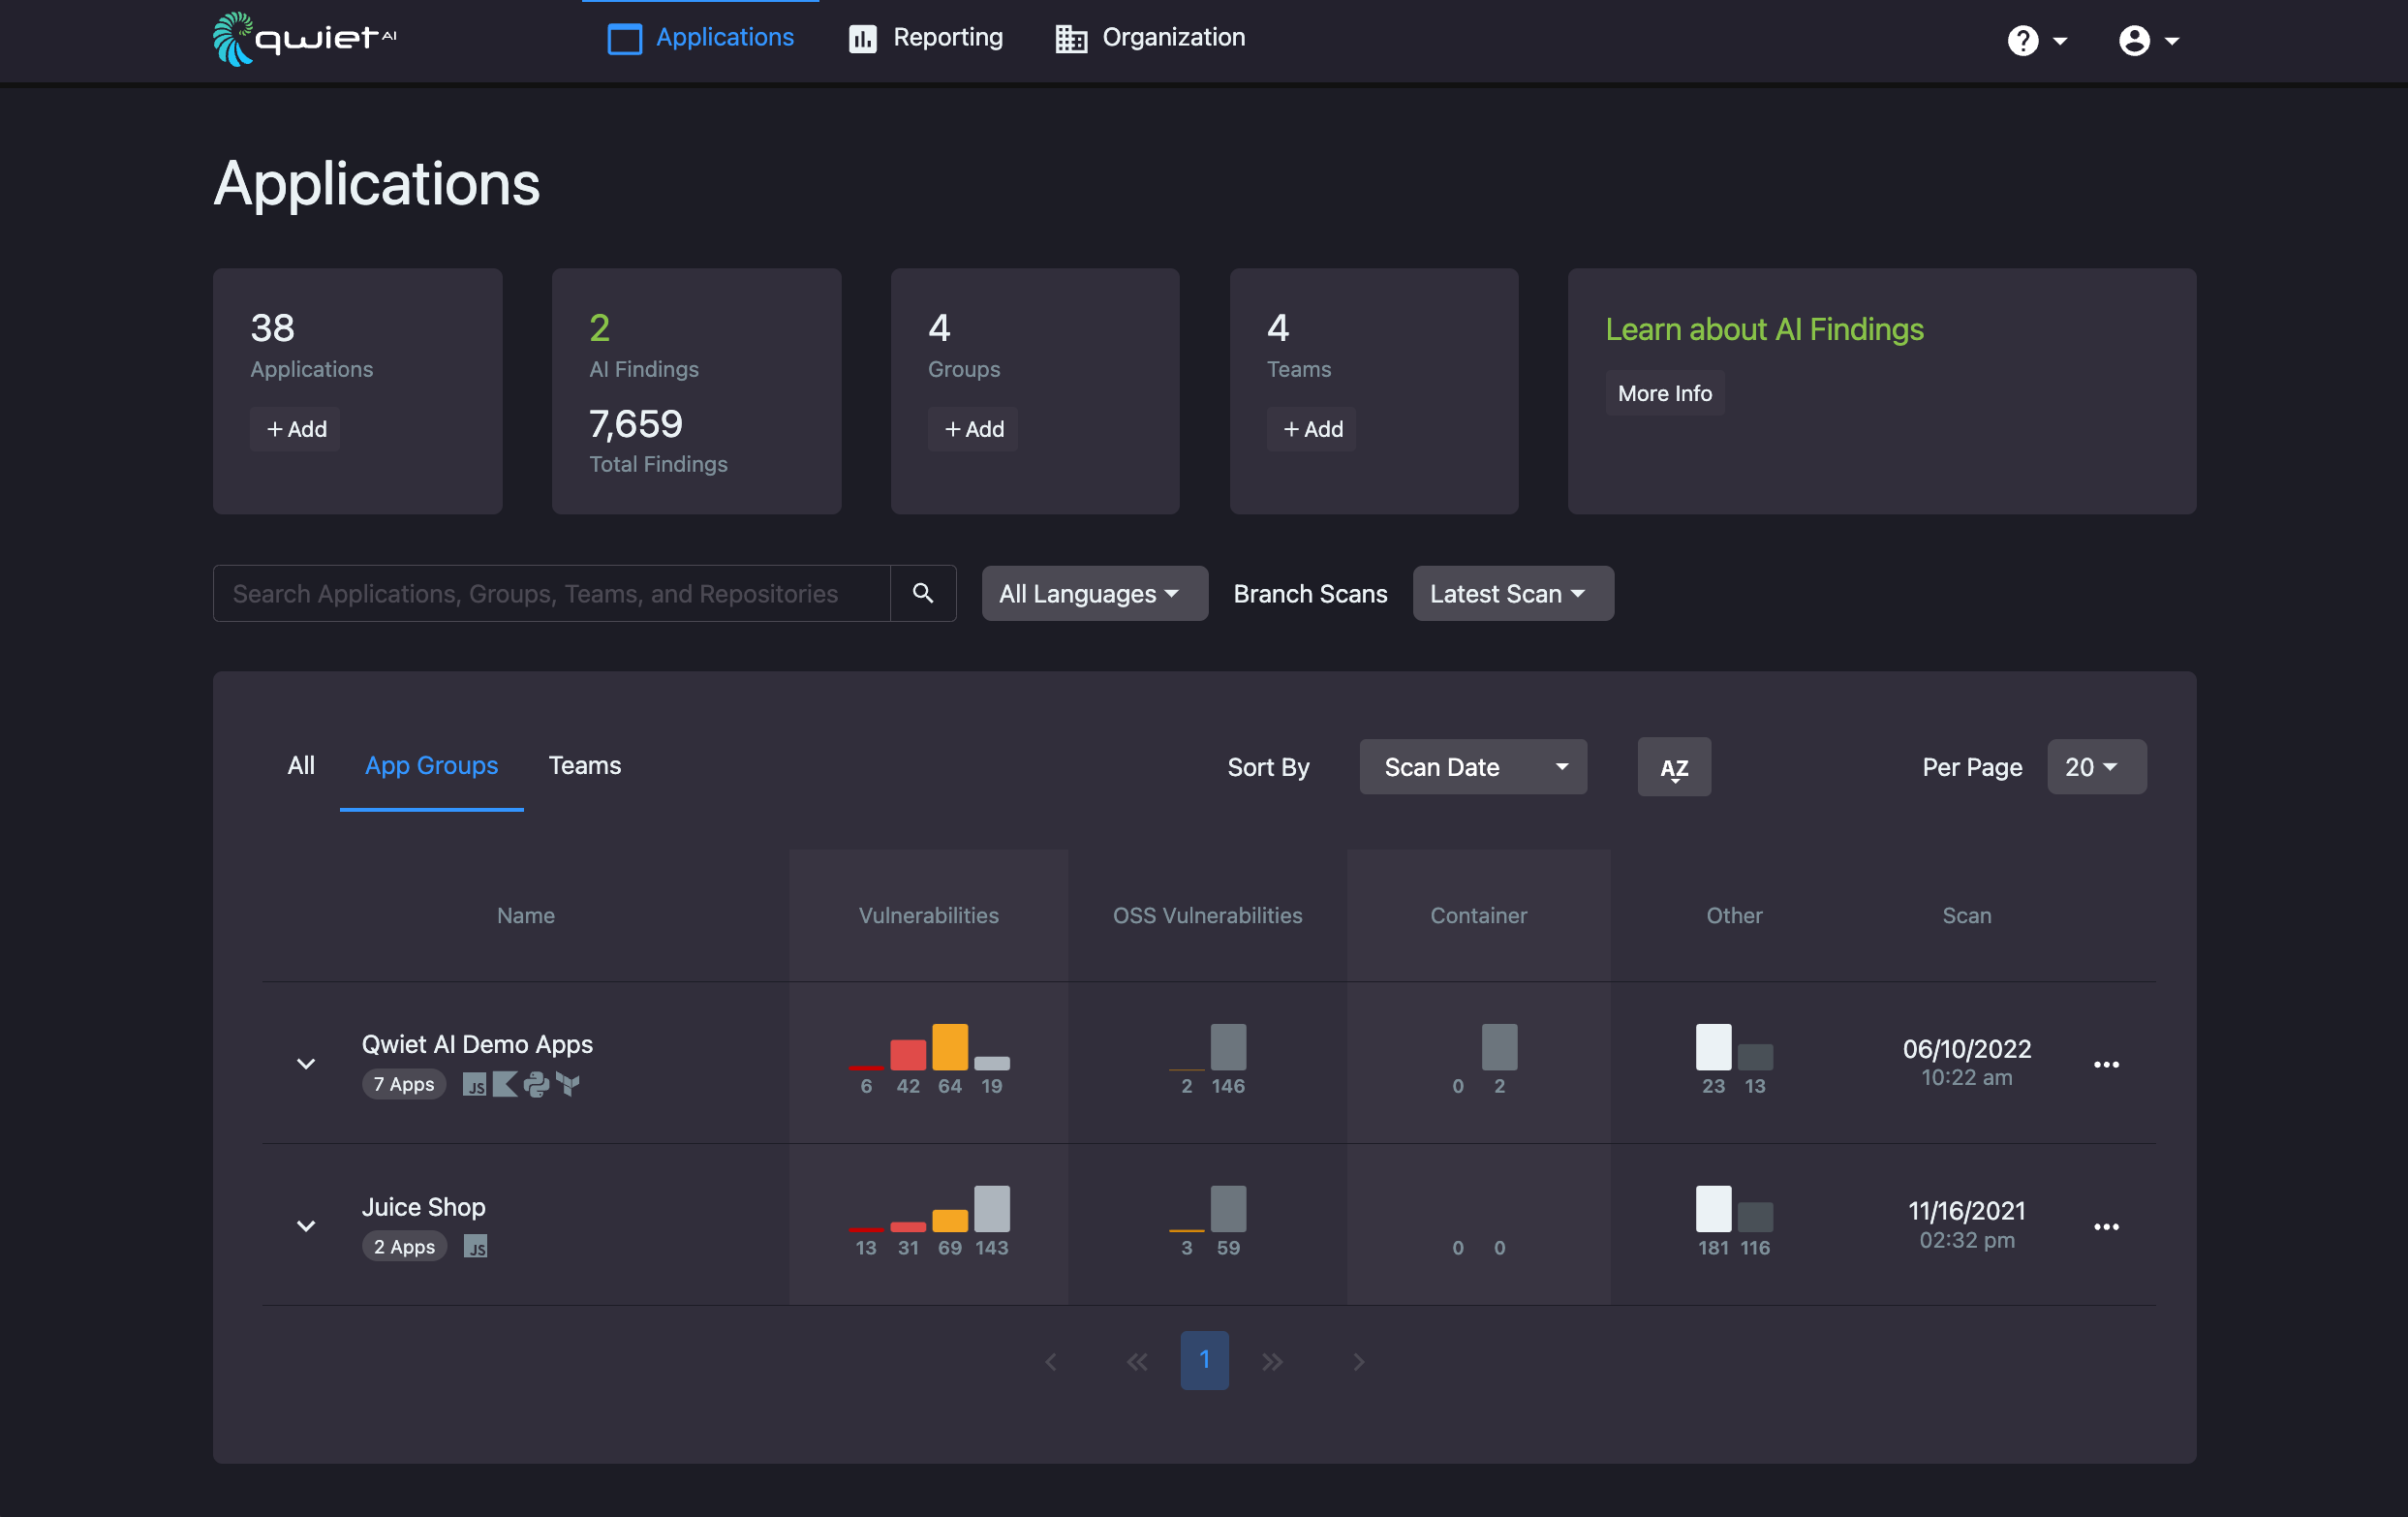 A view of three app groups in the dashboard